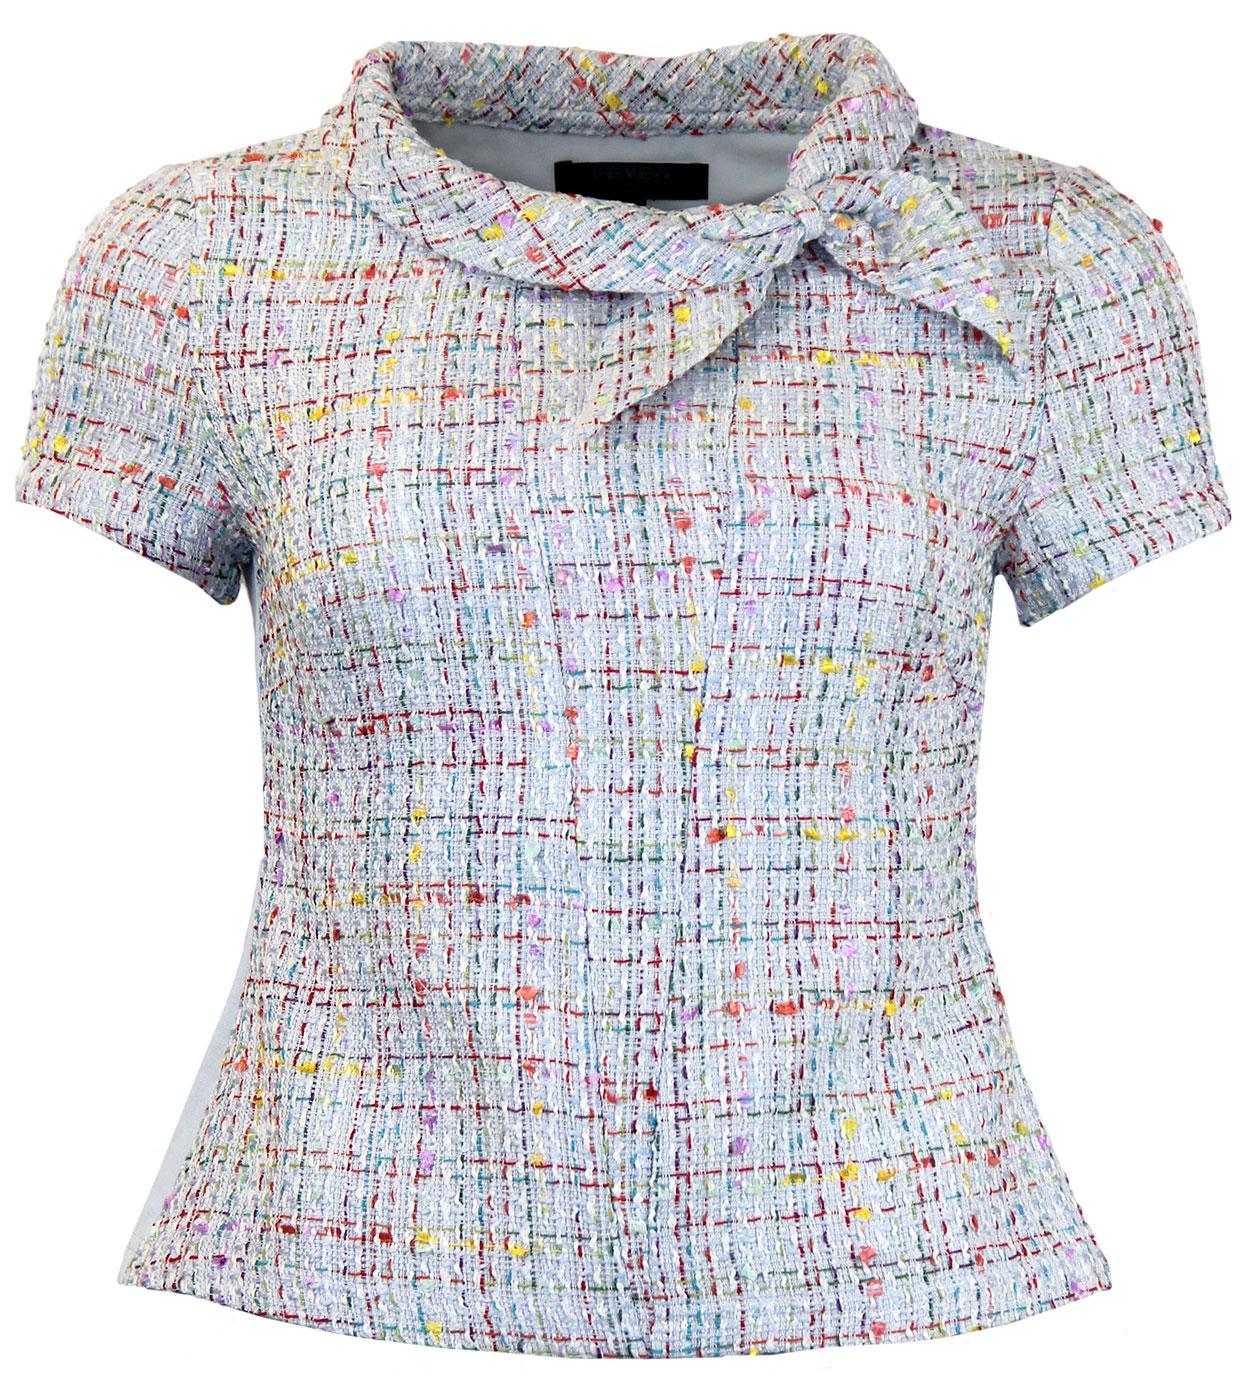 Livorno FEVER 60s Mod Textured Tweed Bow Top